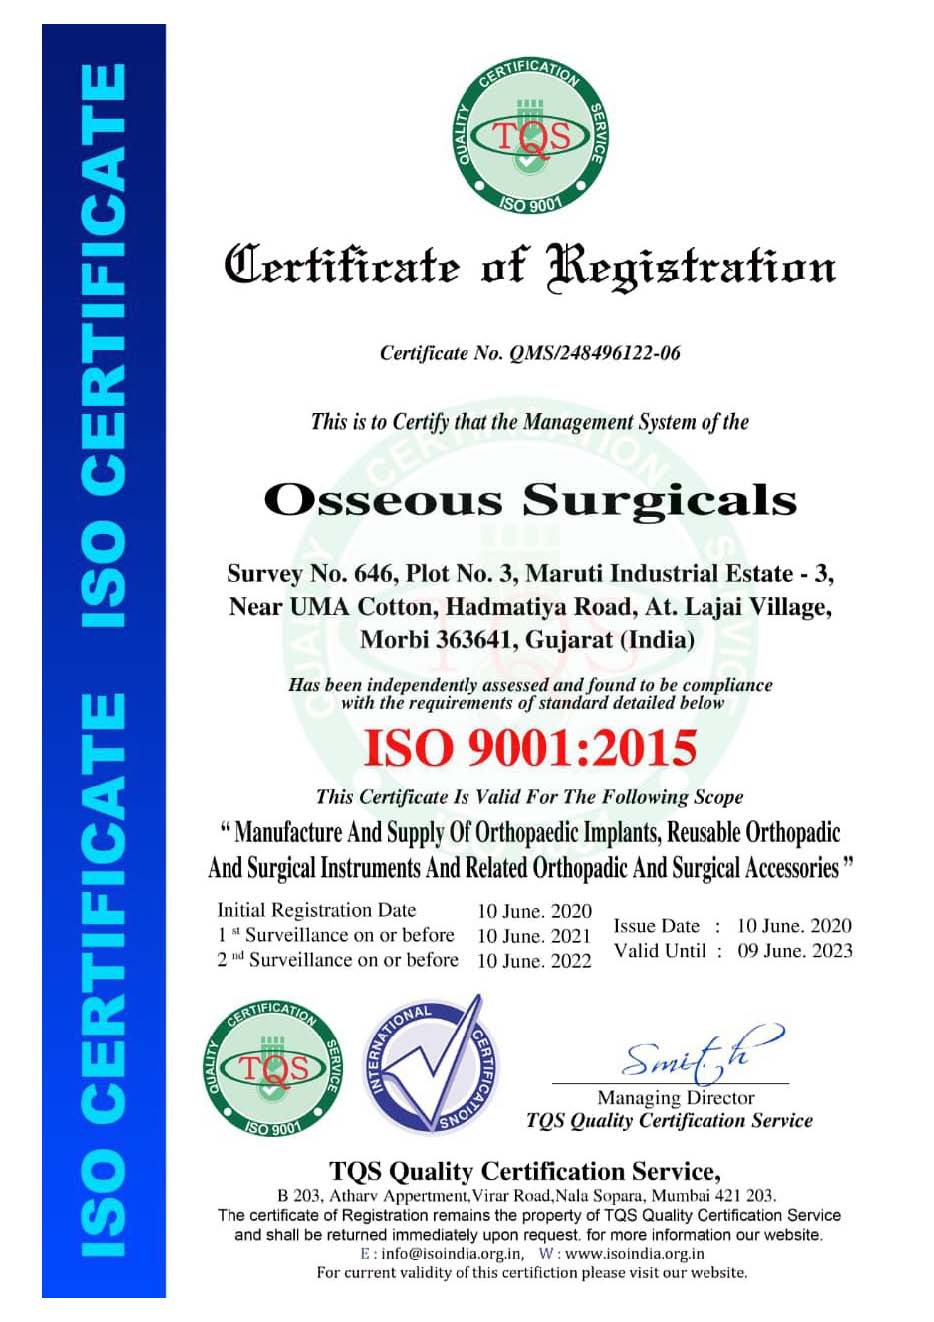 ISO_9001_2015_CERTIFICATE